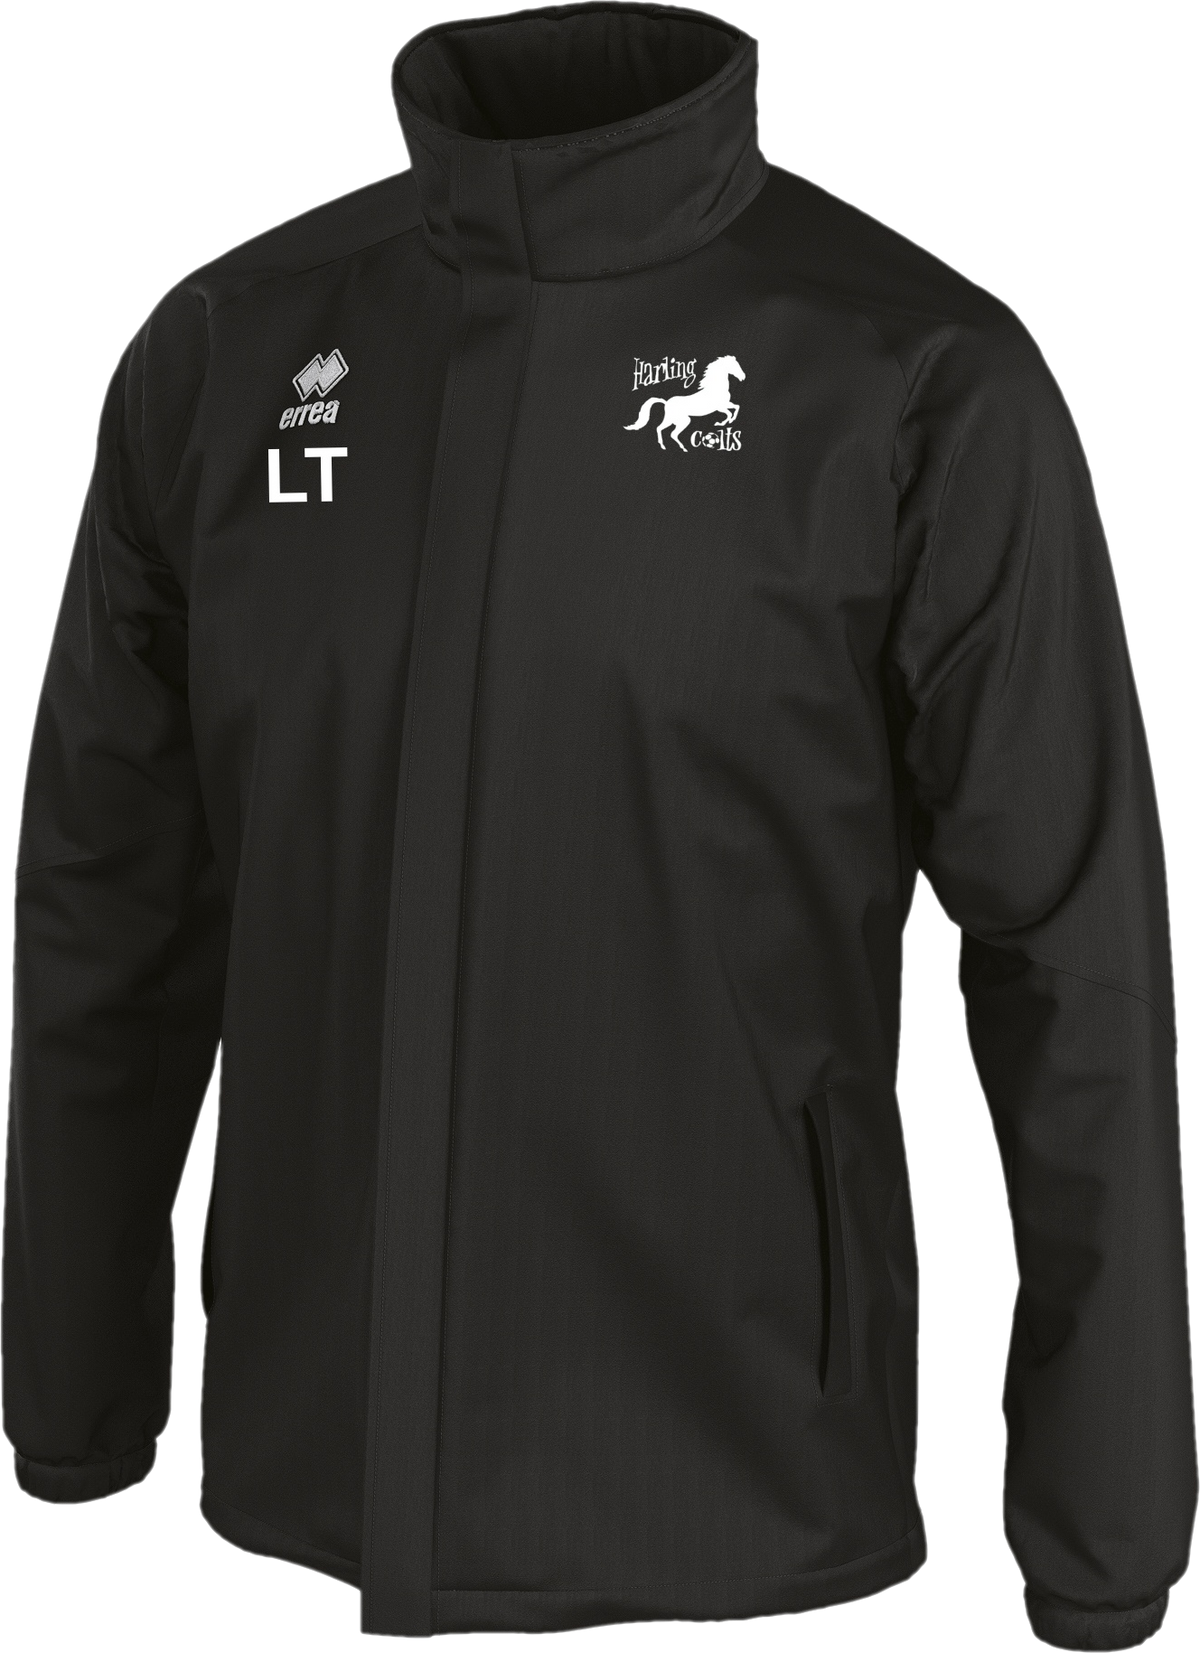 Harling Colts FC Syun Jacket in Adult